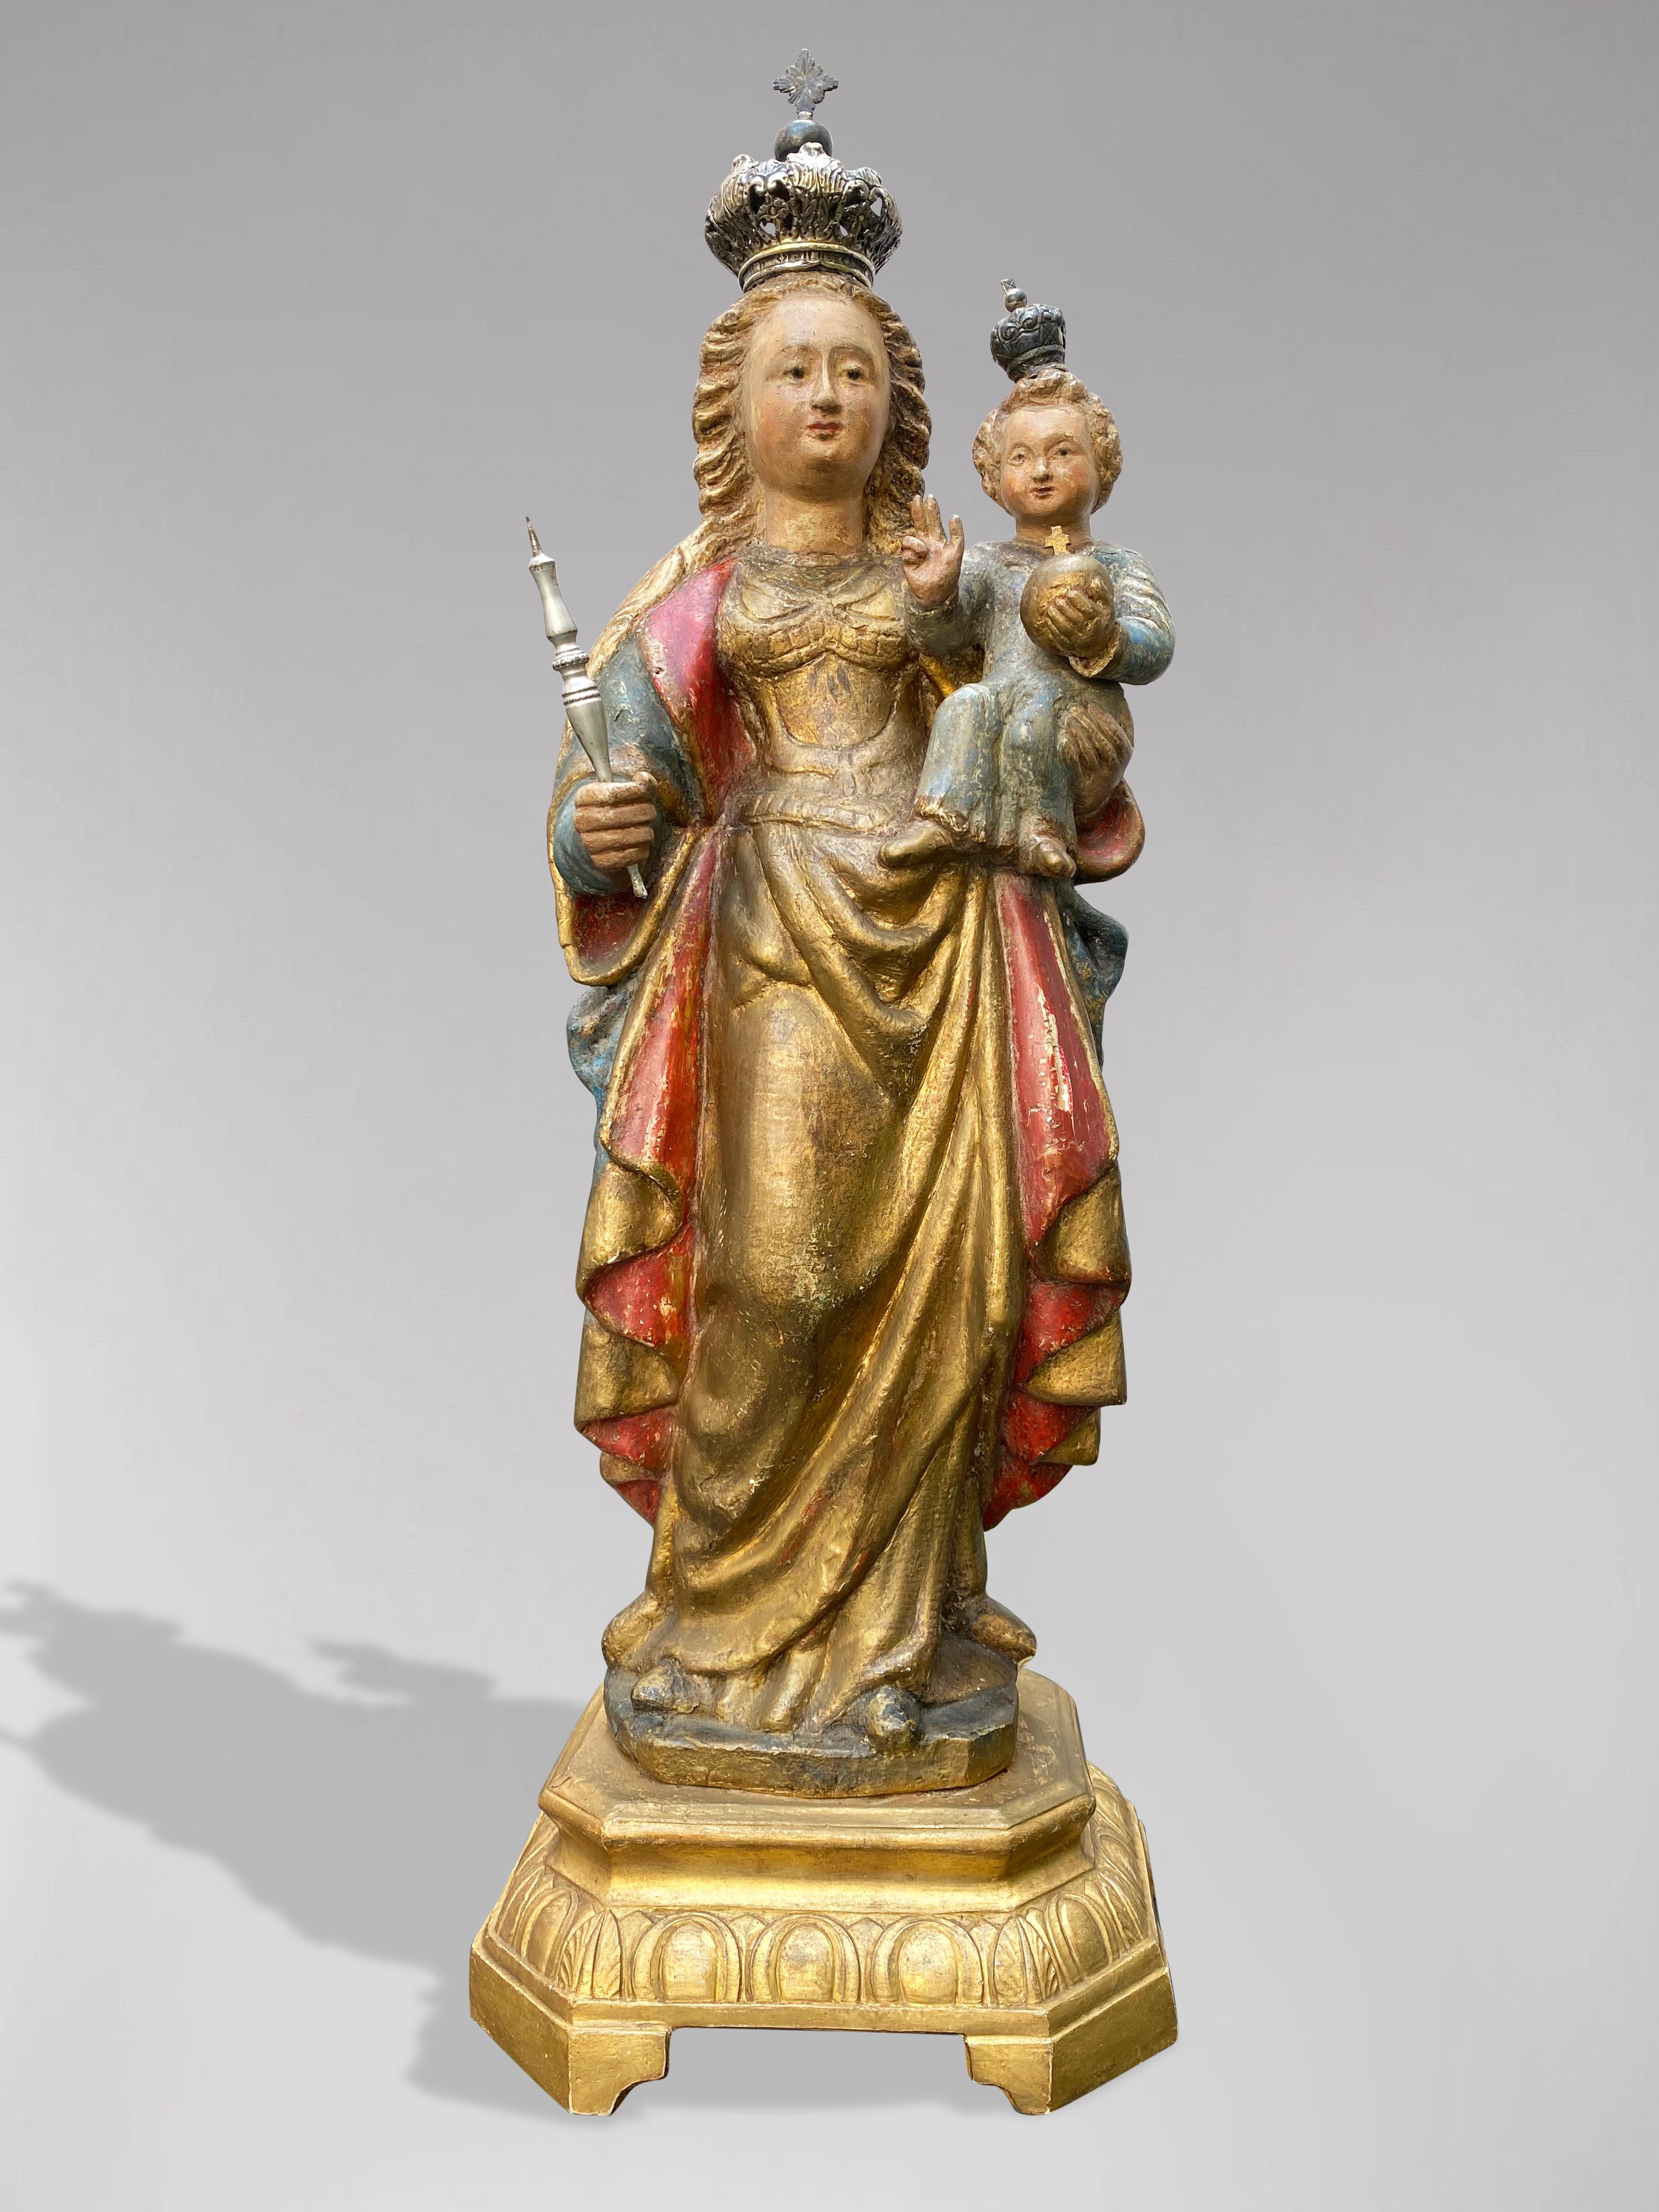 Unknown Figurative Sculpture - A Flemish Statue of Crowned Virgin Mary with Child Jesus, 17th Century